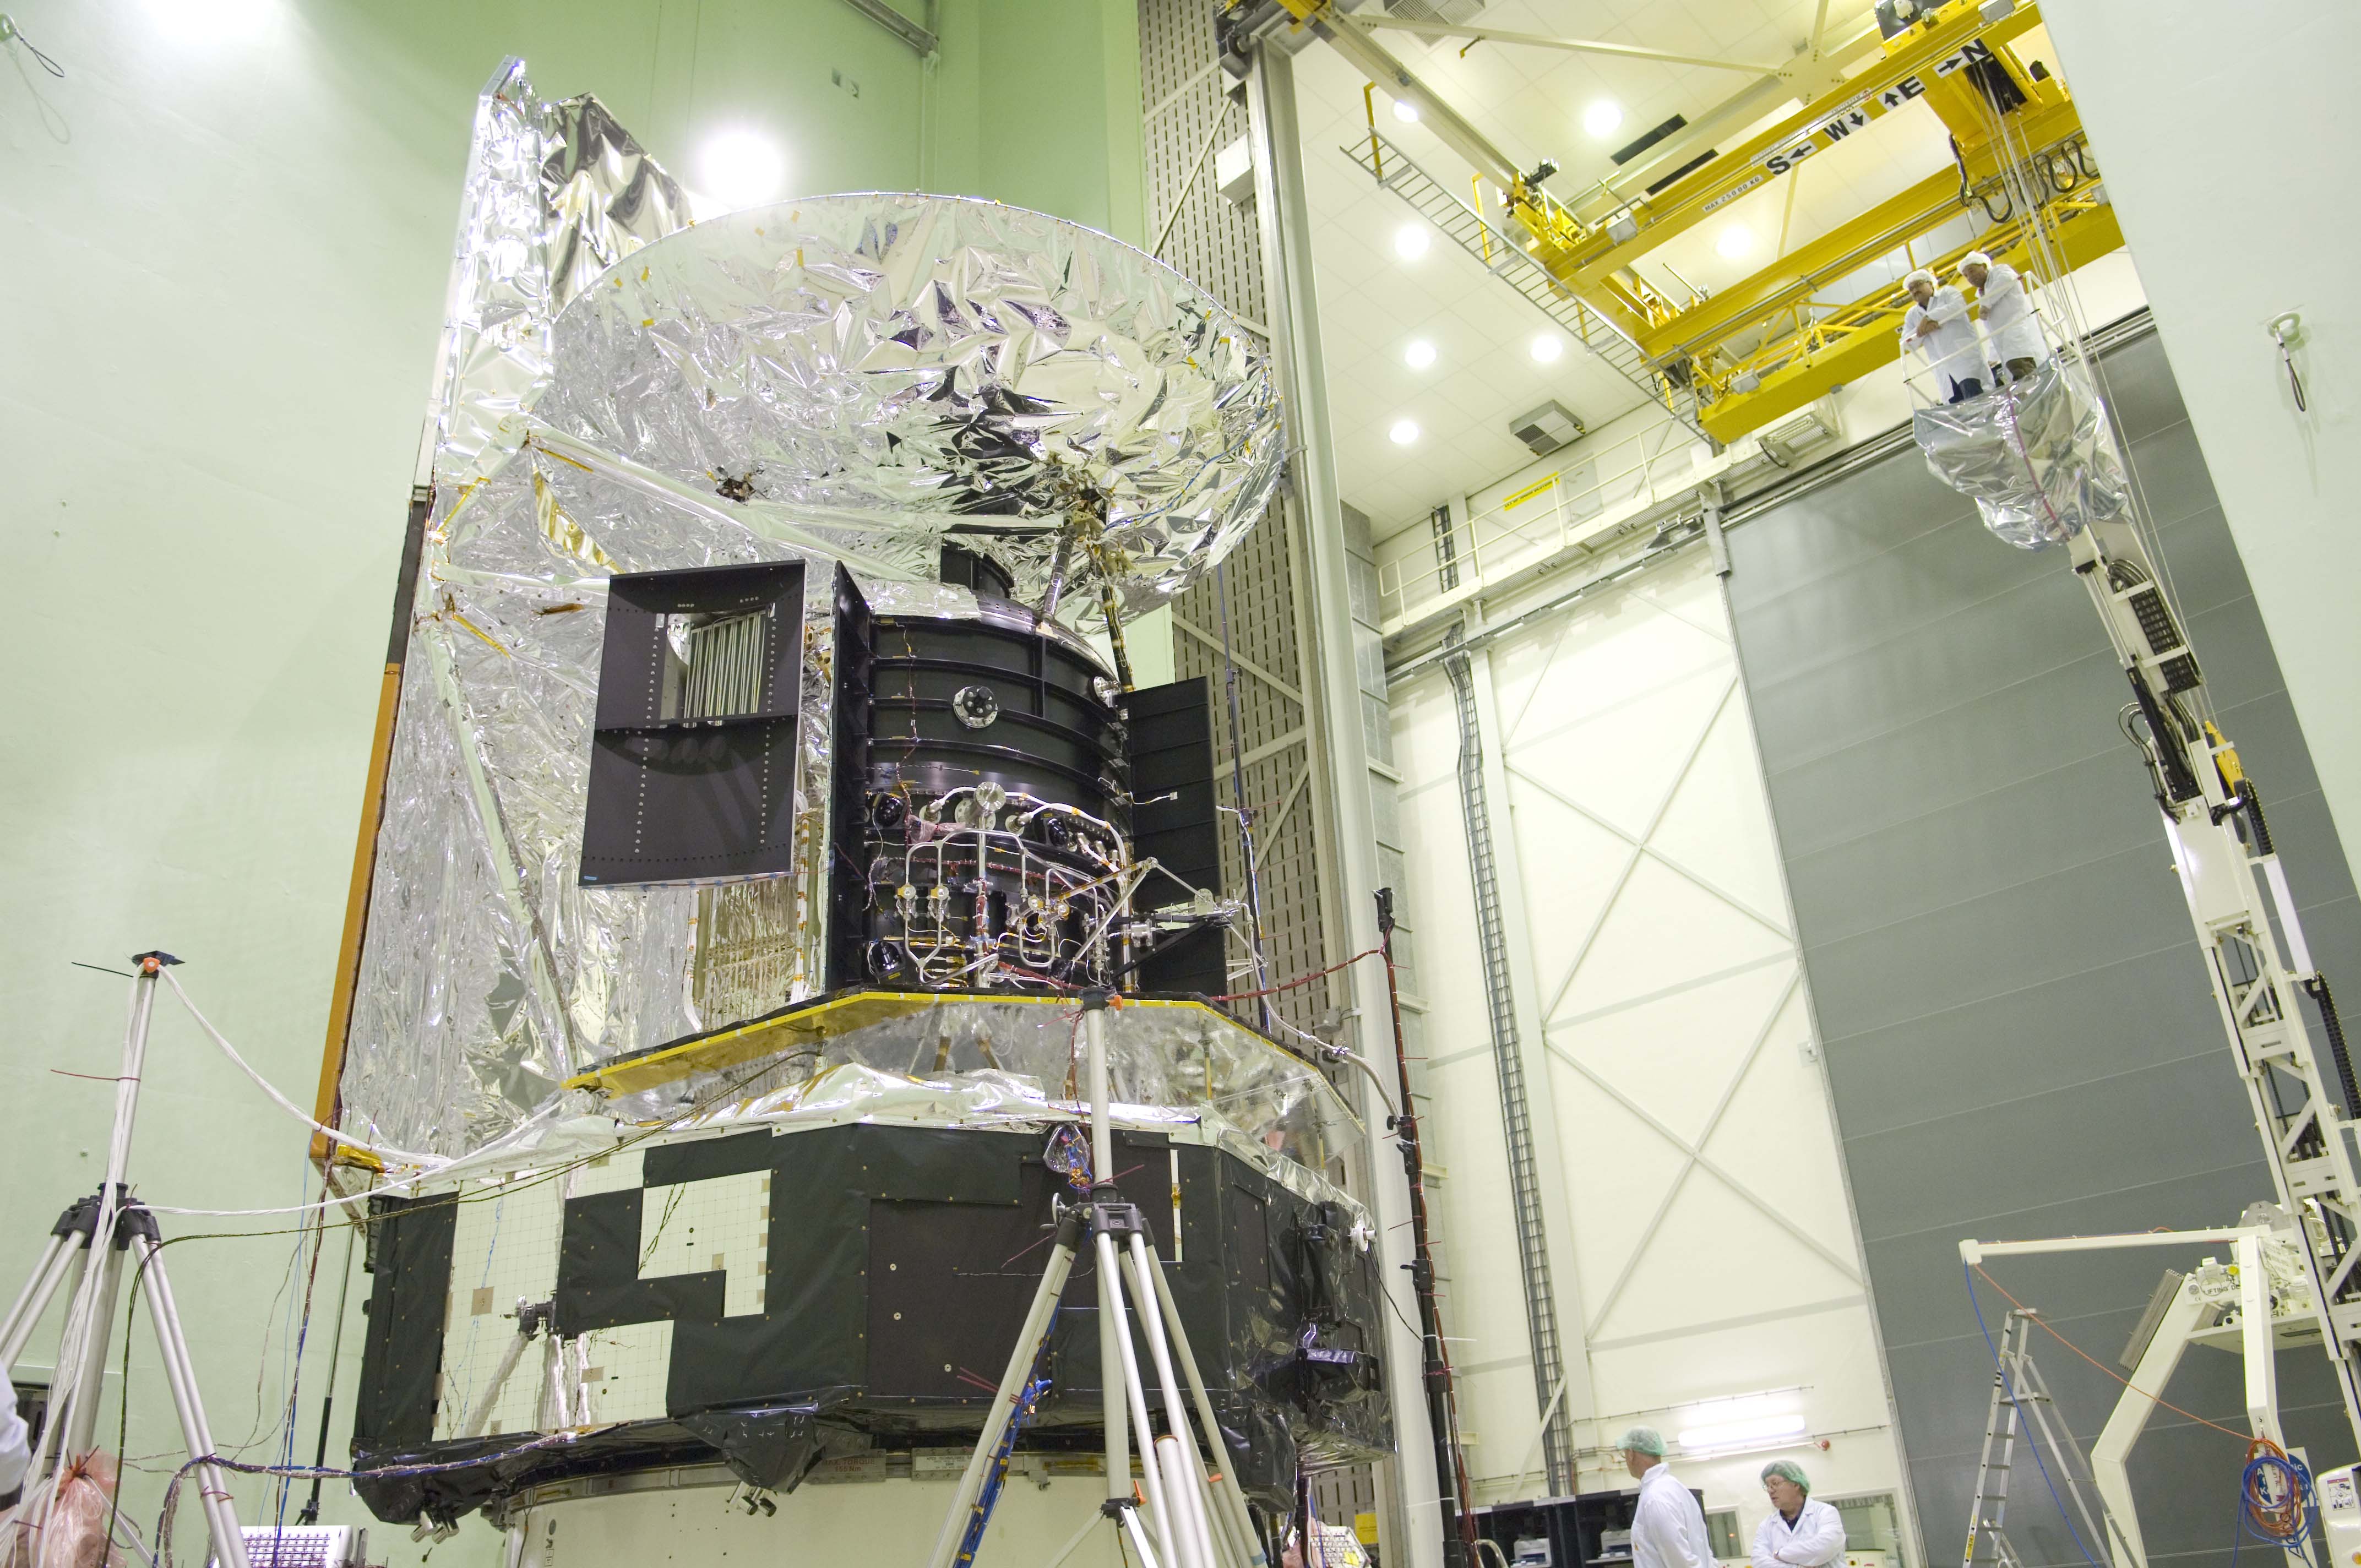 Herschel final test preparations in the Large European Acoustic Facility (LEAF)